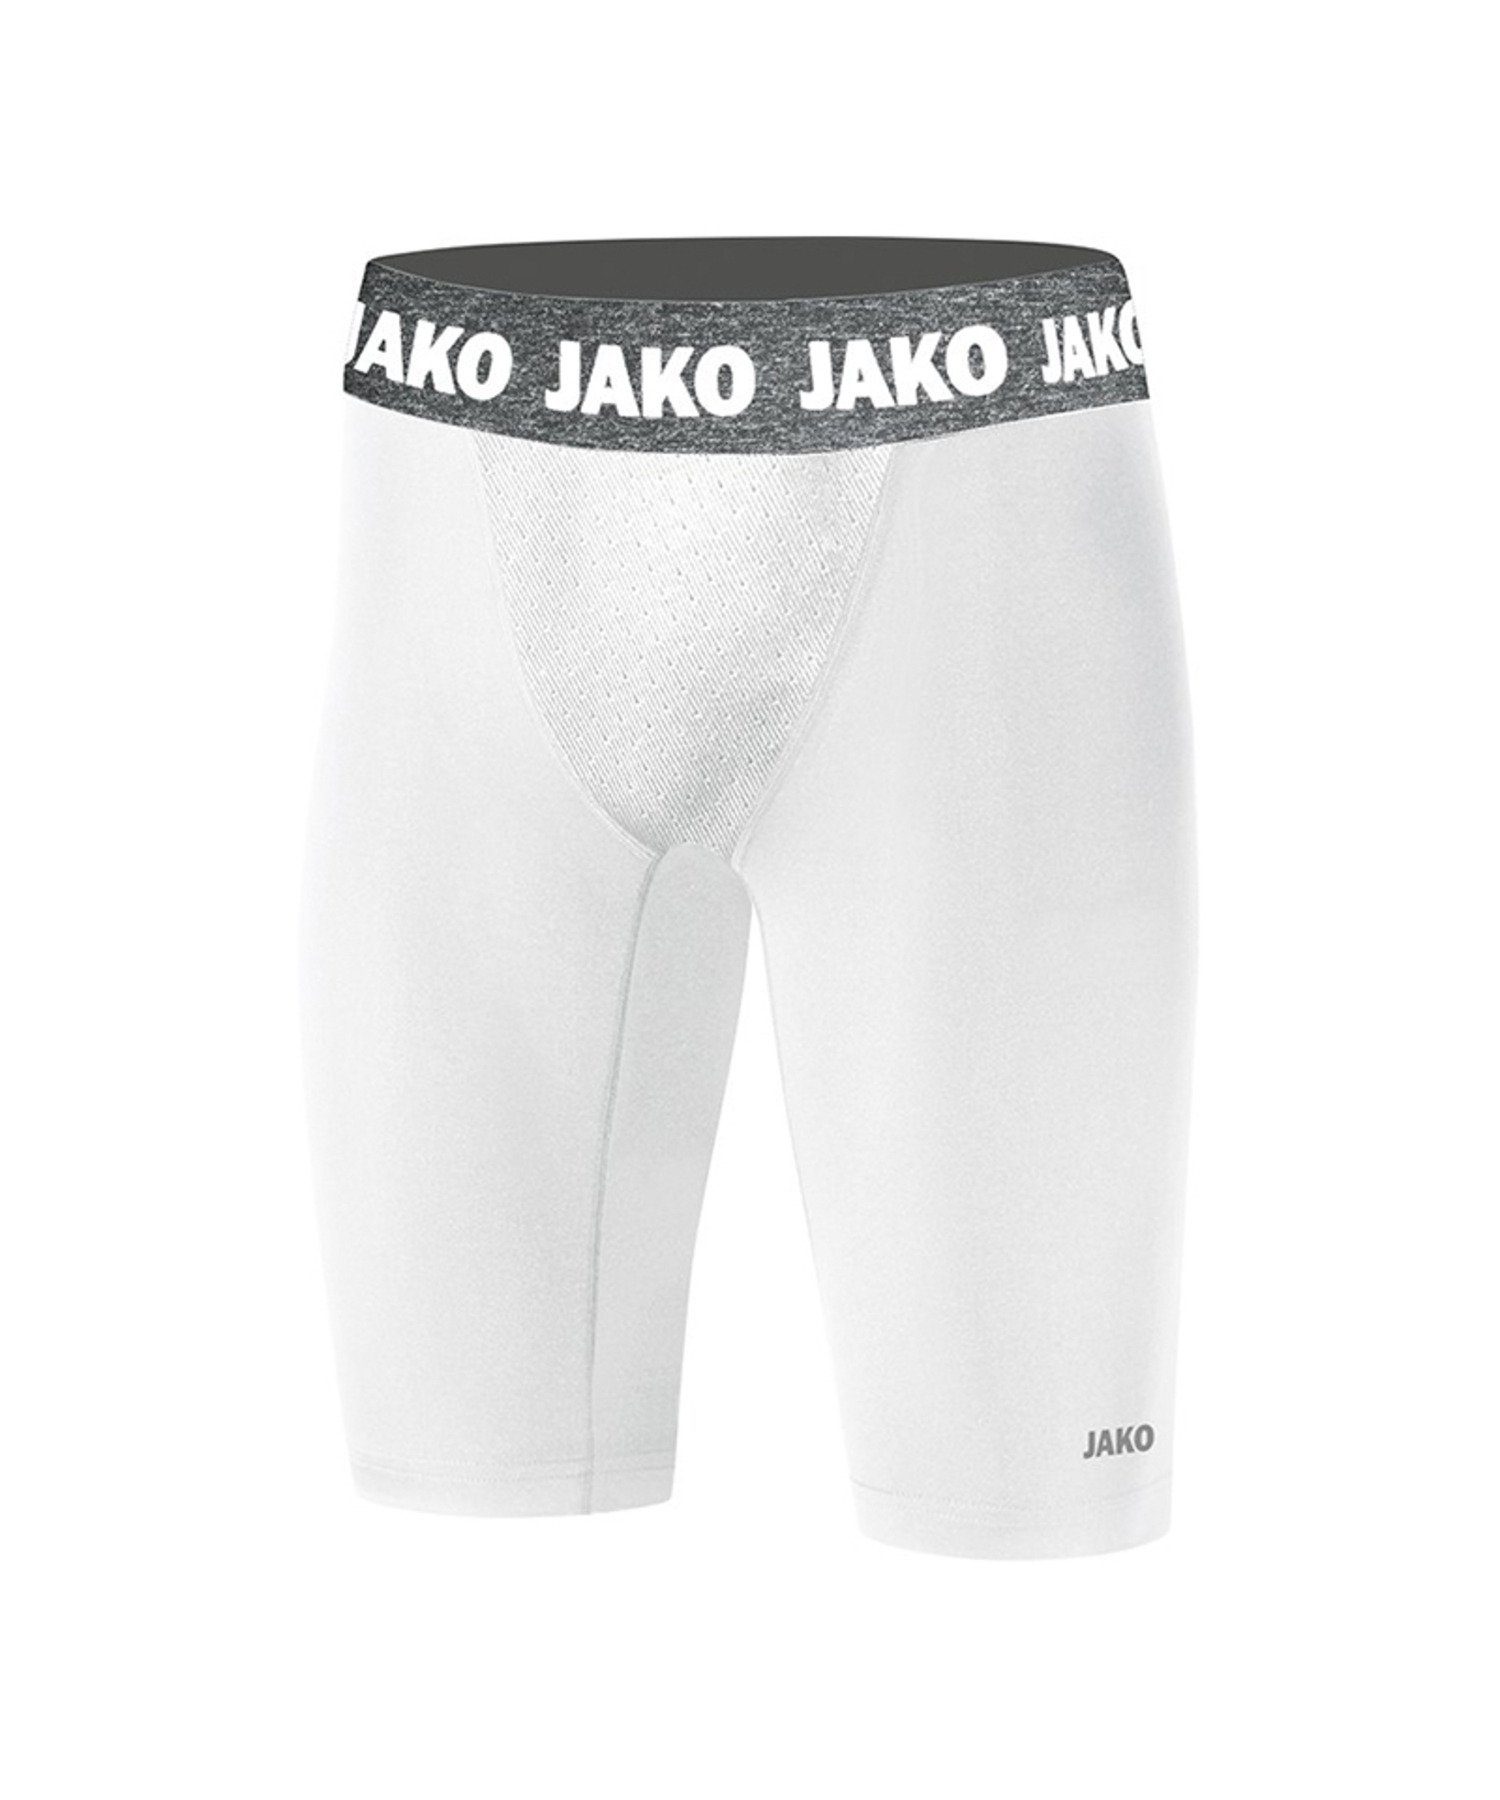 Funktionshose 2.0 weiss Compression Tight Jako Short